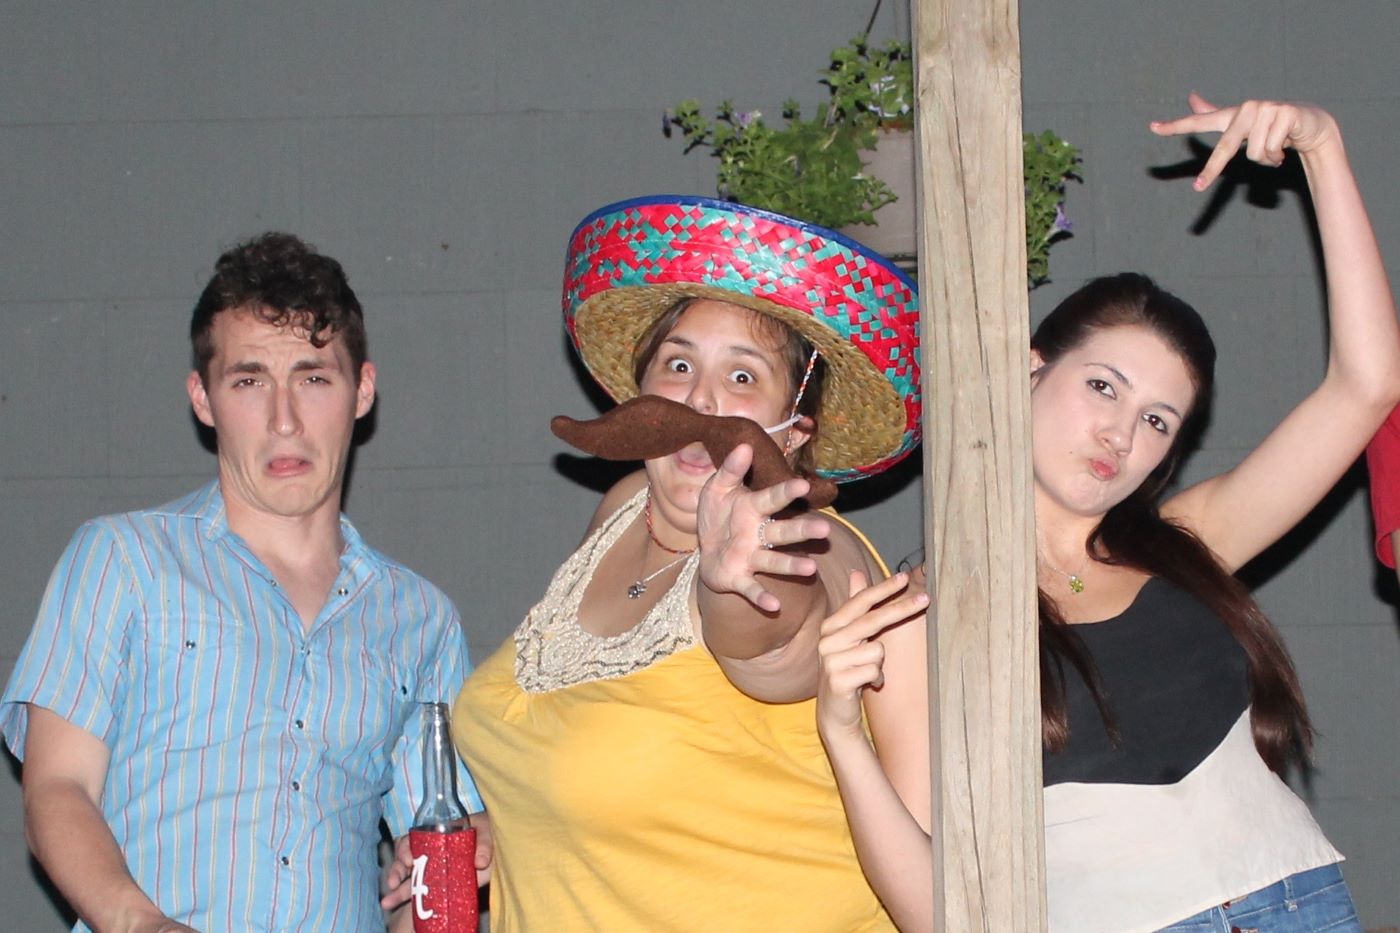 Danielle with a sombrero and lab undergrads enjoy the fiesta